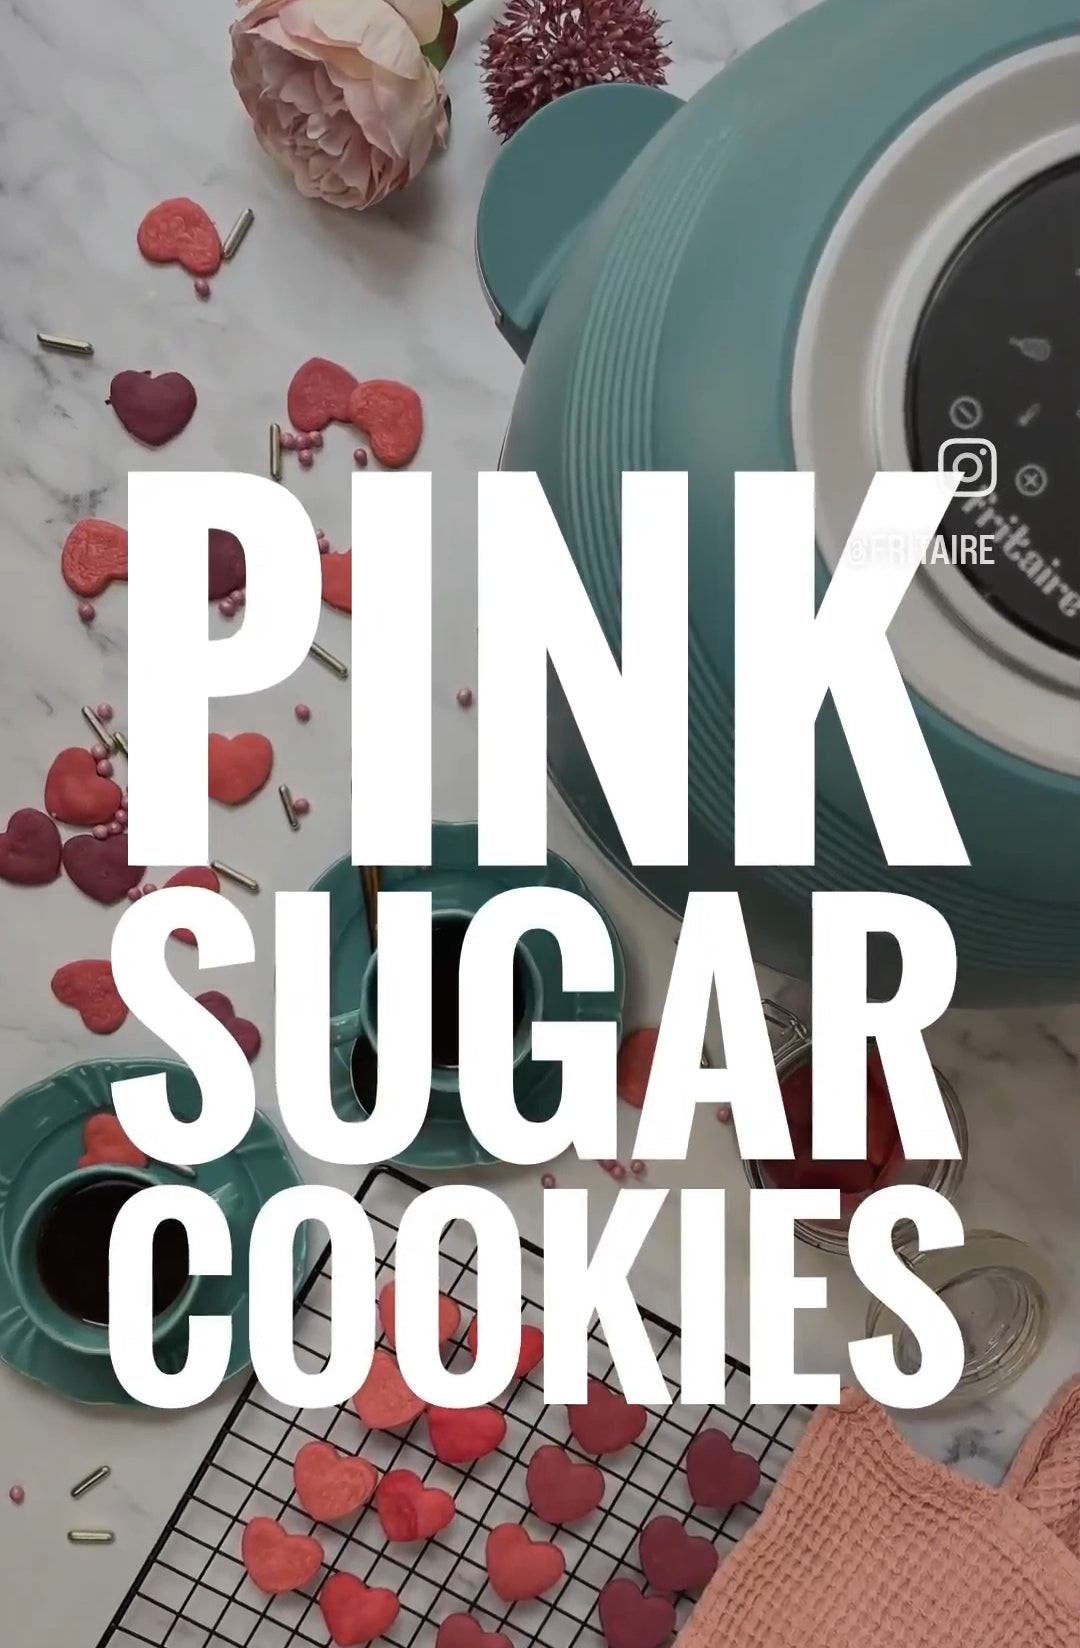 Barbie says “Pink Sugar cookies in your Fritaire airfryer”